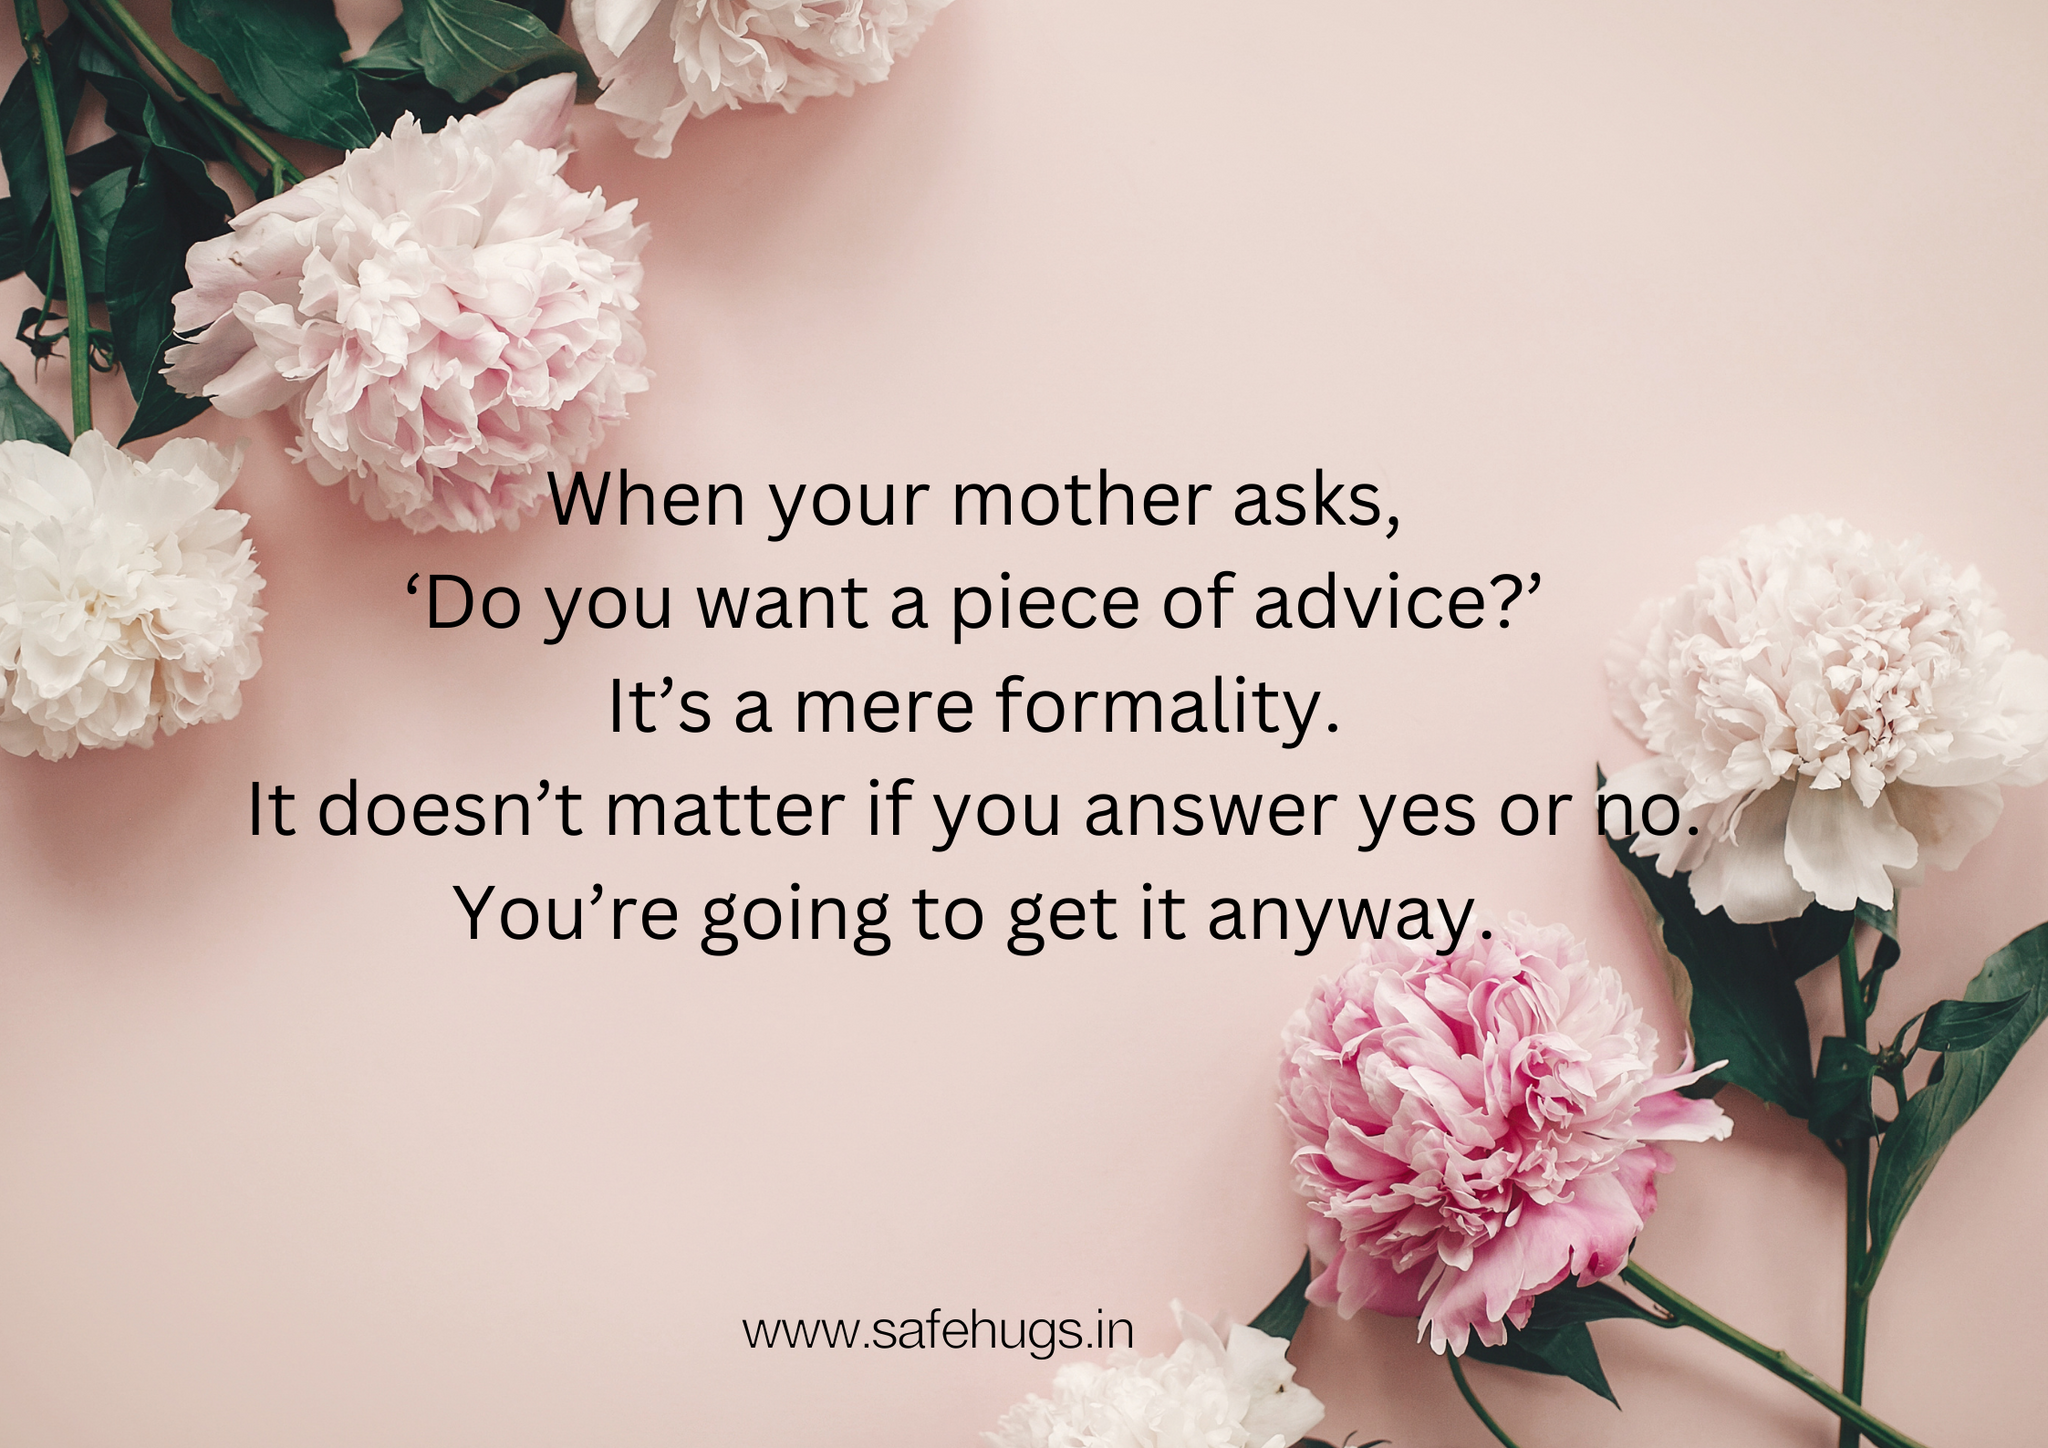 Quote: 'When your mother asks, ‘Do you want a piece of advice?’ it’s a mere formality. It doesn’t matter if you answer yes or no. You’re going to get it anyway.'